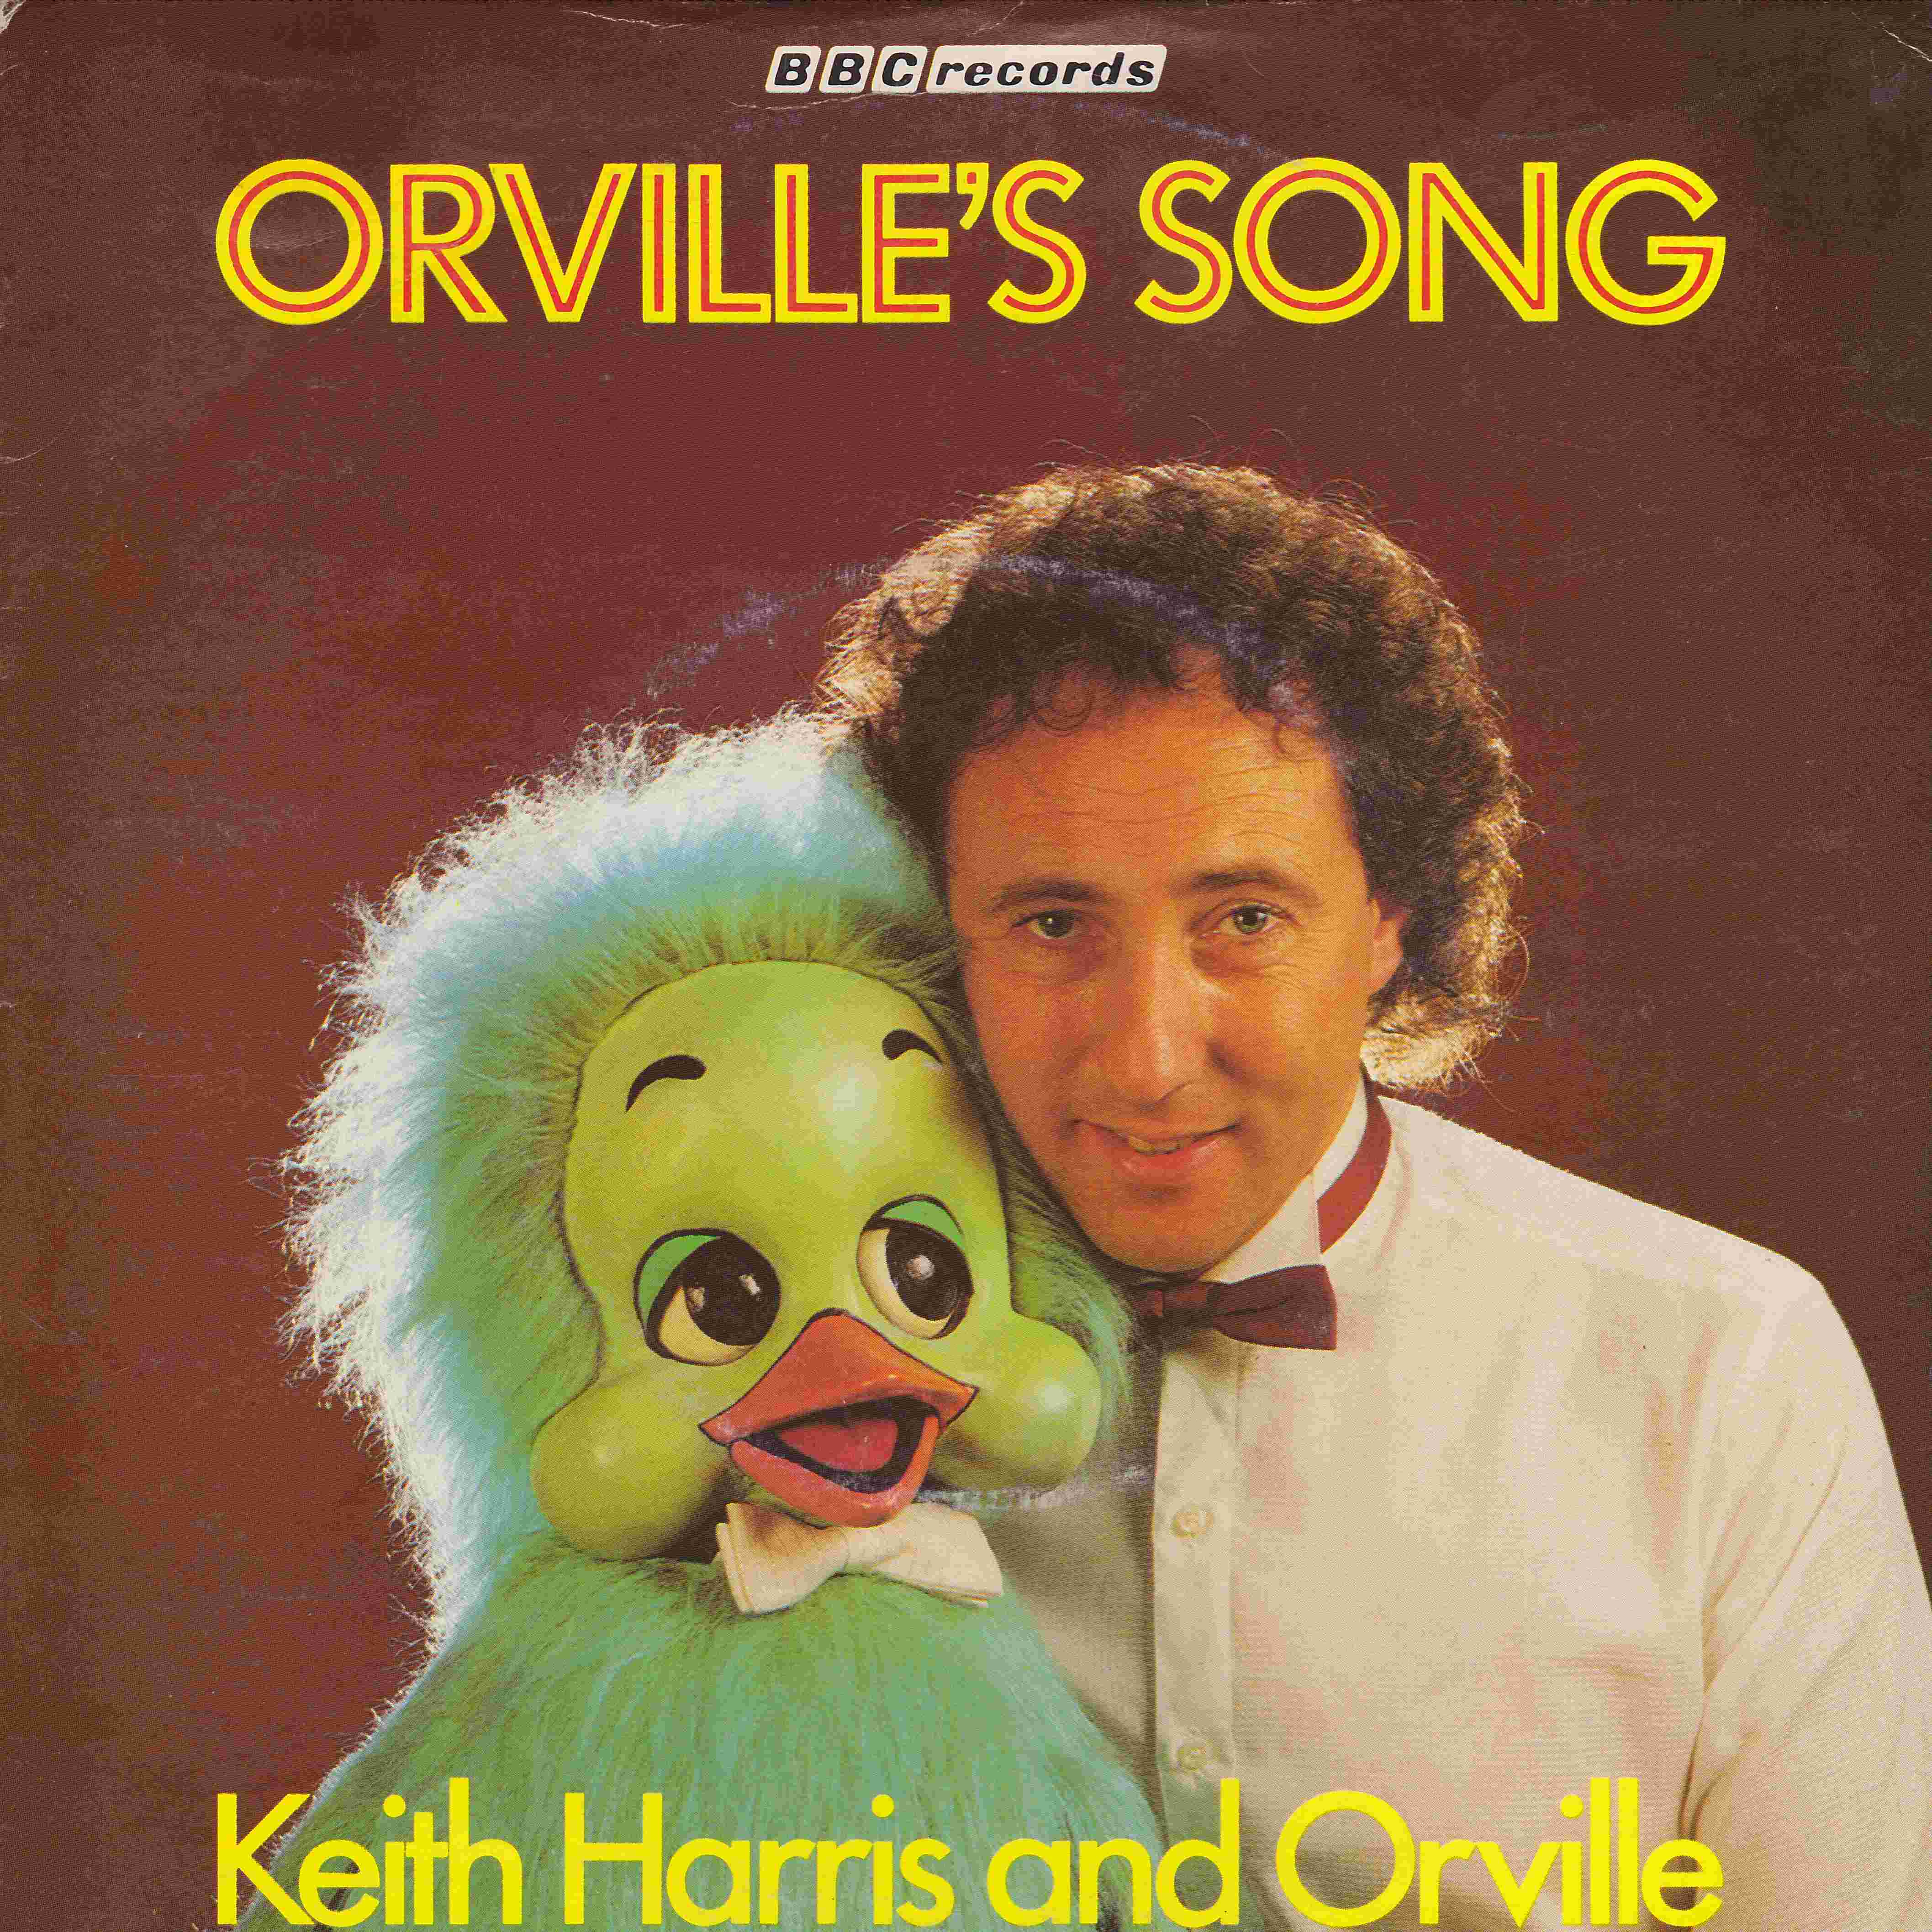 Picture of RESL 124 Orville's song by artist Keith Harris and Orville from the BBC singles - Records and Tapes library